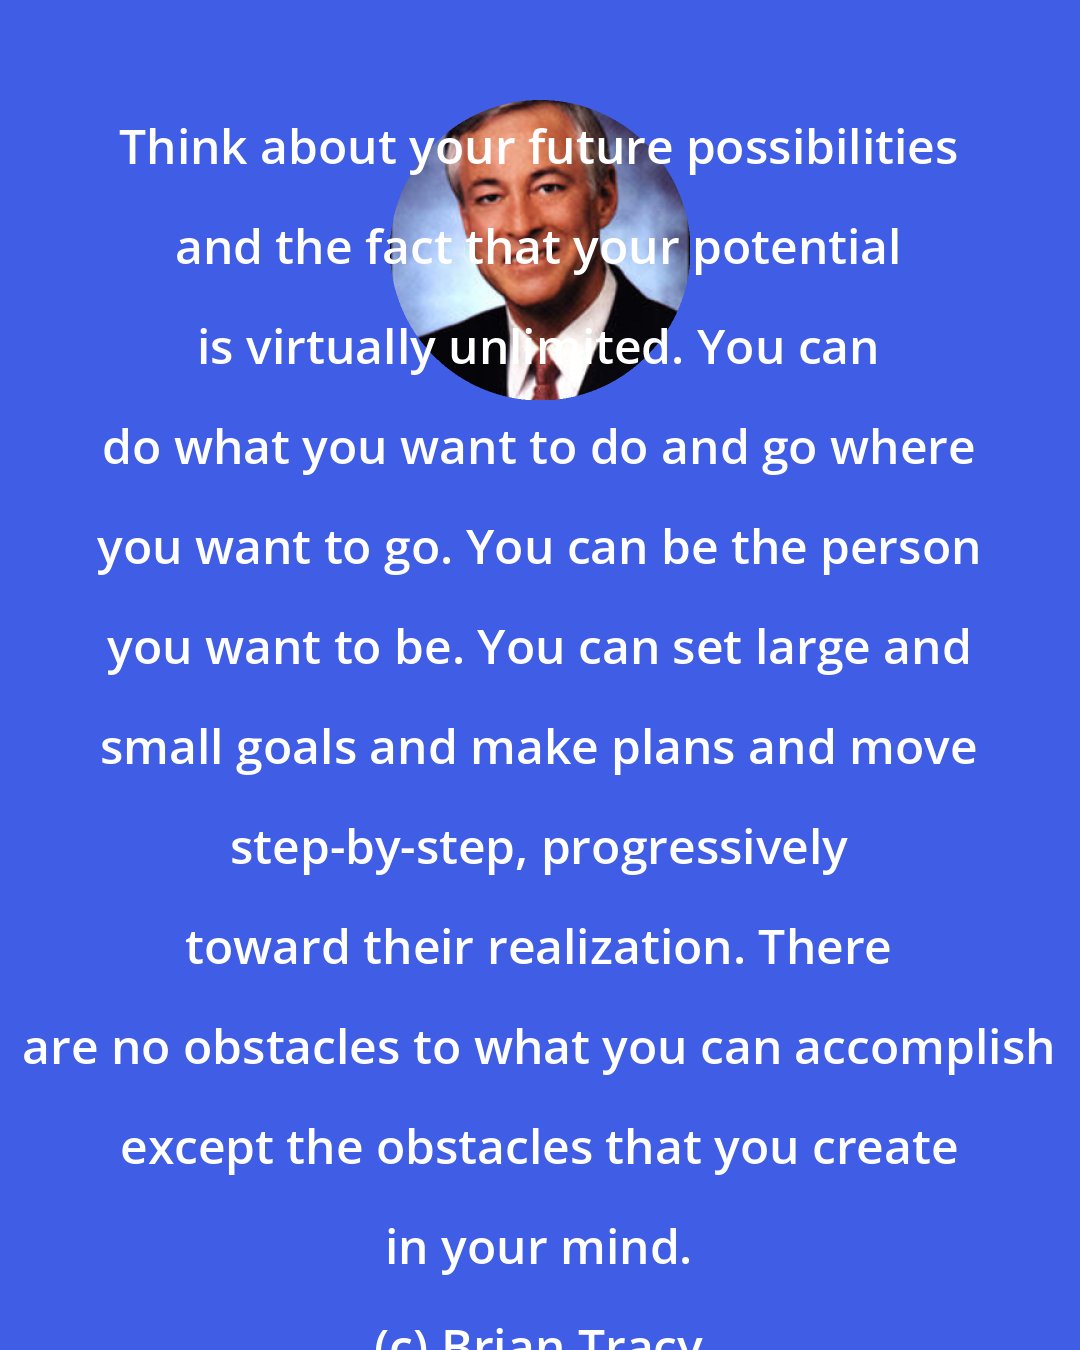 Brian Tracy: Think about your future possibilities and the fact that your potential is virtually unlimited. You can do what you want to do and go where you want to go. You can be the person you want to be. You can set large and small goals and make plans and move step-by-step, progressively toward their realization. There are no obstacles to what you can accomplish except the obstacles that you create in your mind.